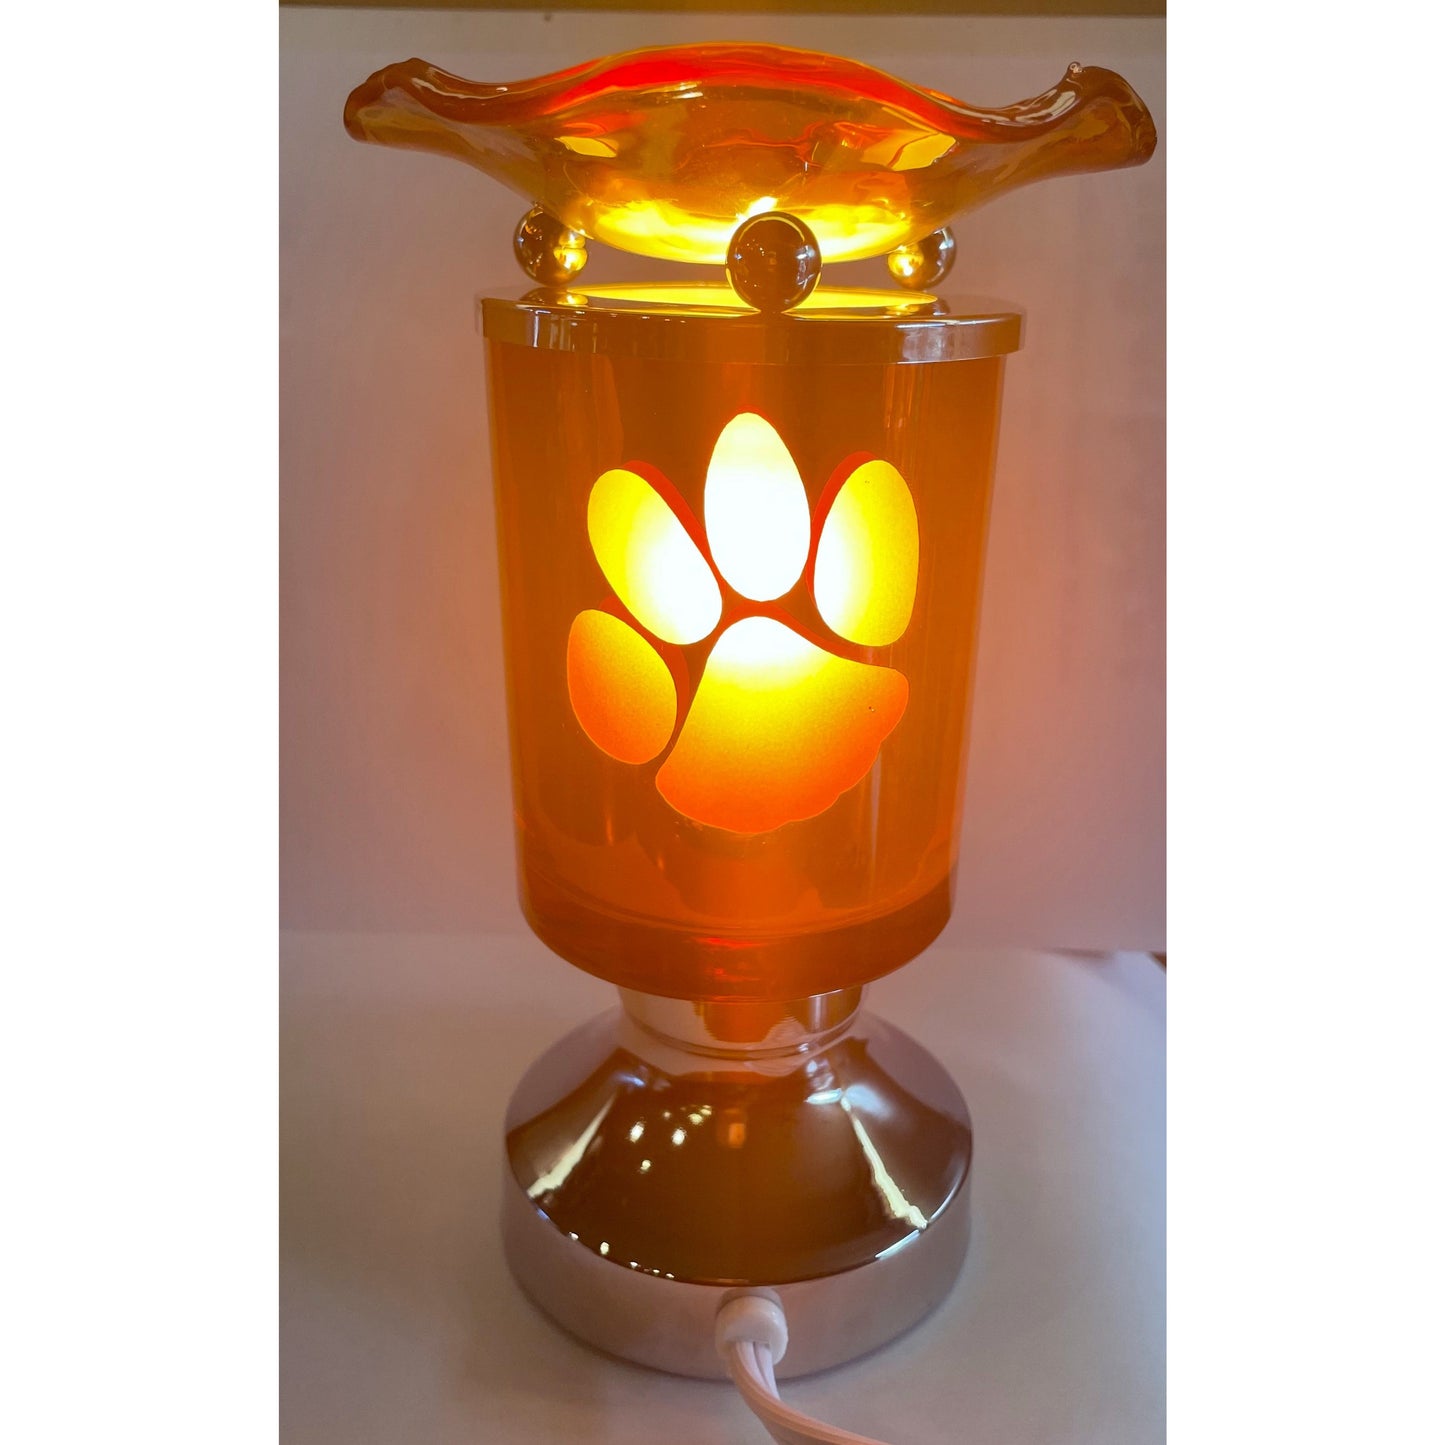 Paw Print Touch Electric Fragrance lamp, aromatic oil burner, wax melter